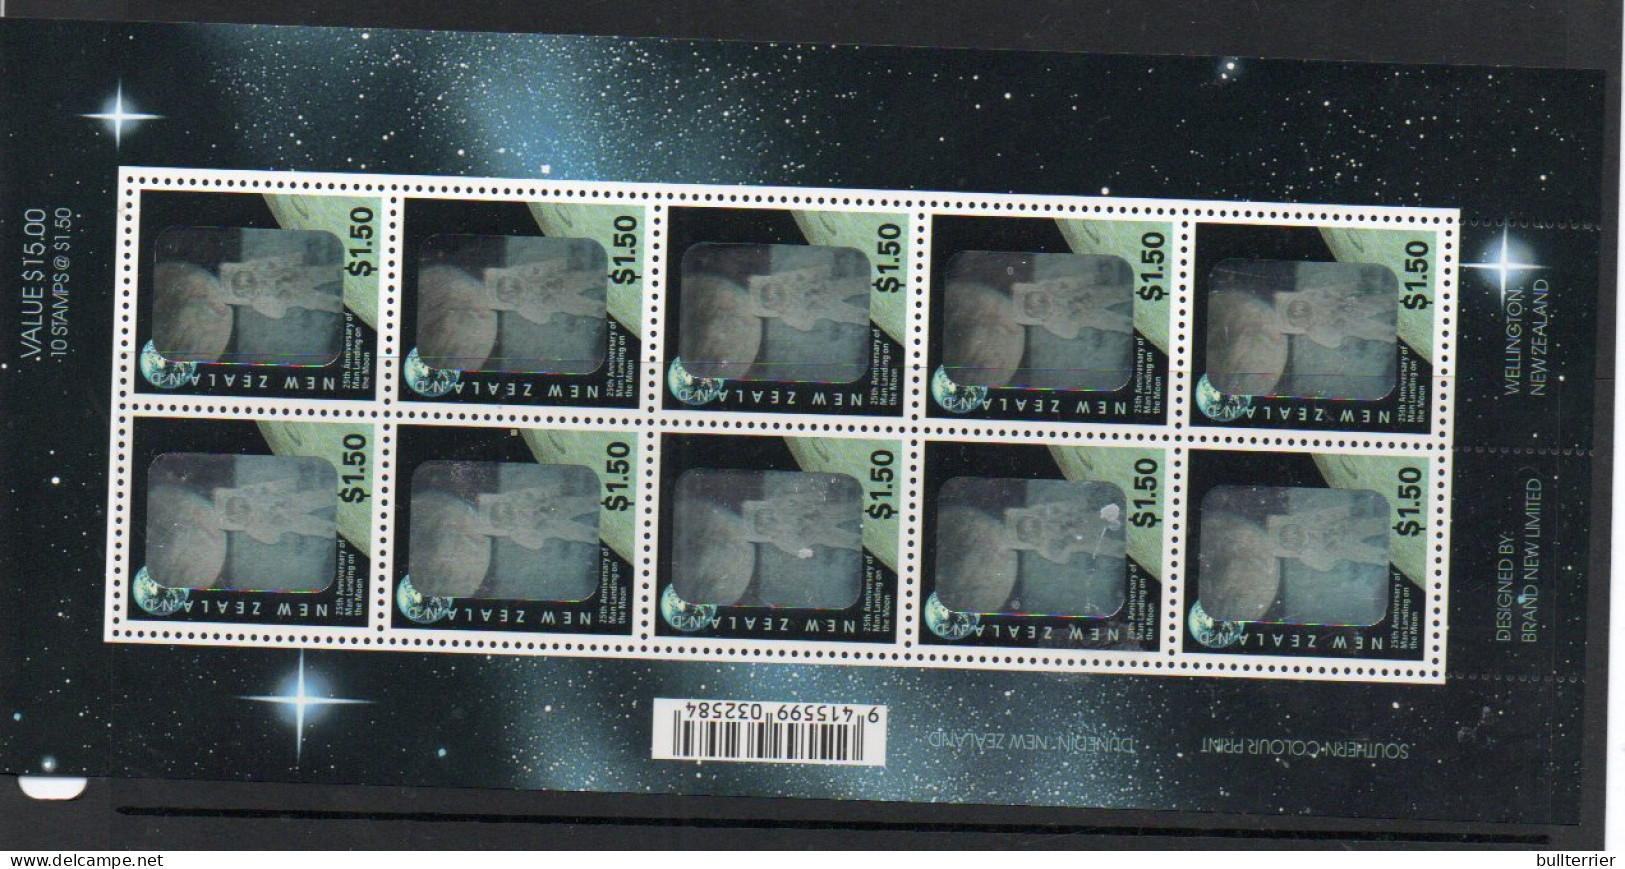 HOLOGRAMS - NEW ZEALAND - 1994- MAN ON MOON £1.50 SHEETLET OF 10  MINT NEVER HINGED, SG CAT £22.50 - Holograms